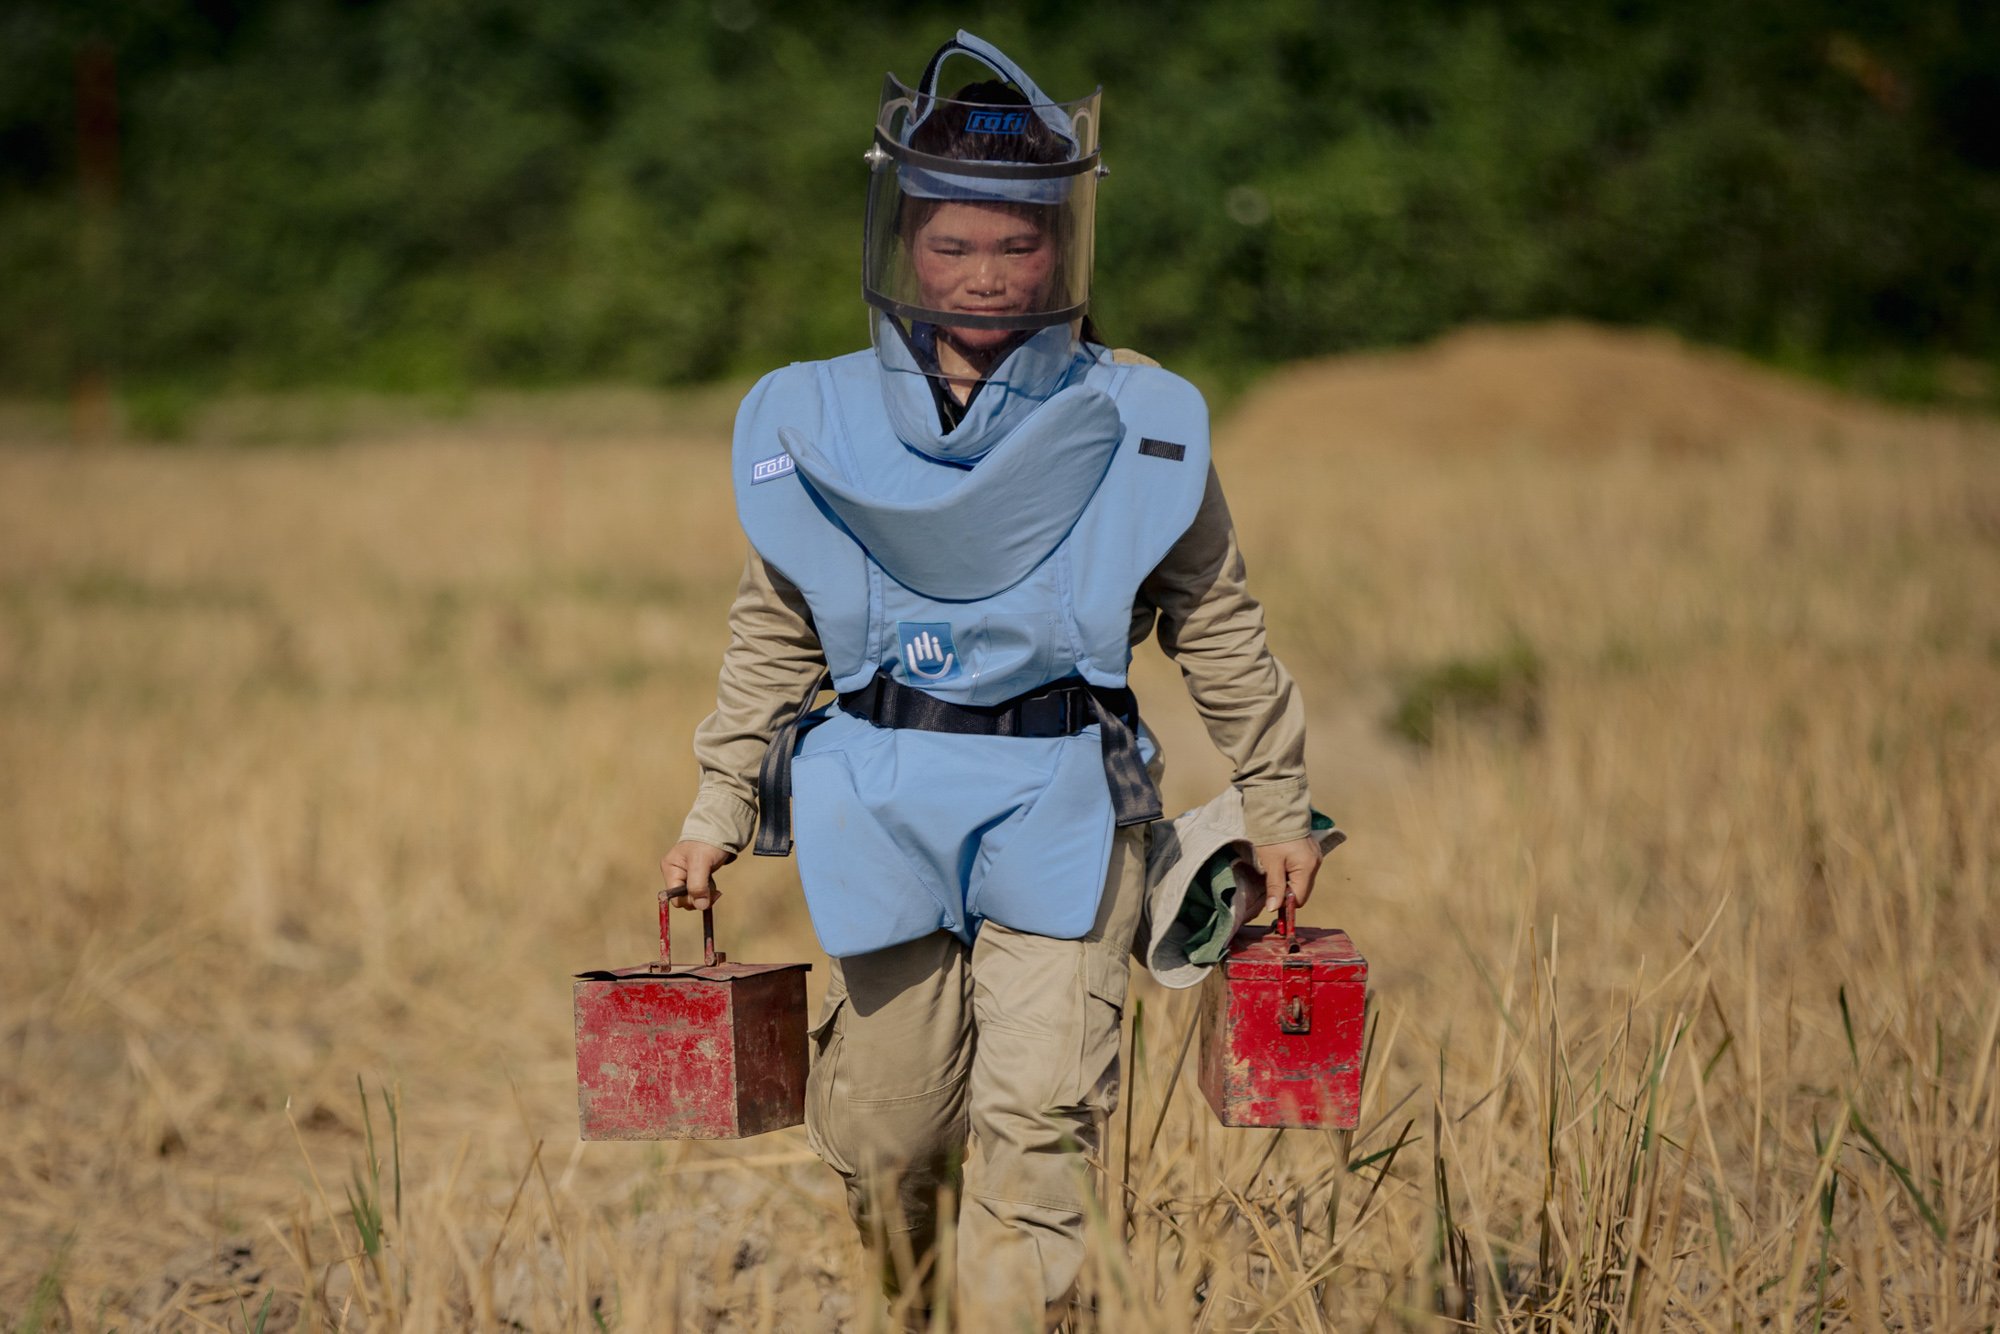  Section Commander Ket, 30, carries detonators before a controlled demolition of a sub-munition found in a rice paddy littered with unexploded ordnance (UXO) near Muang Mai, Laos. 